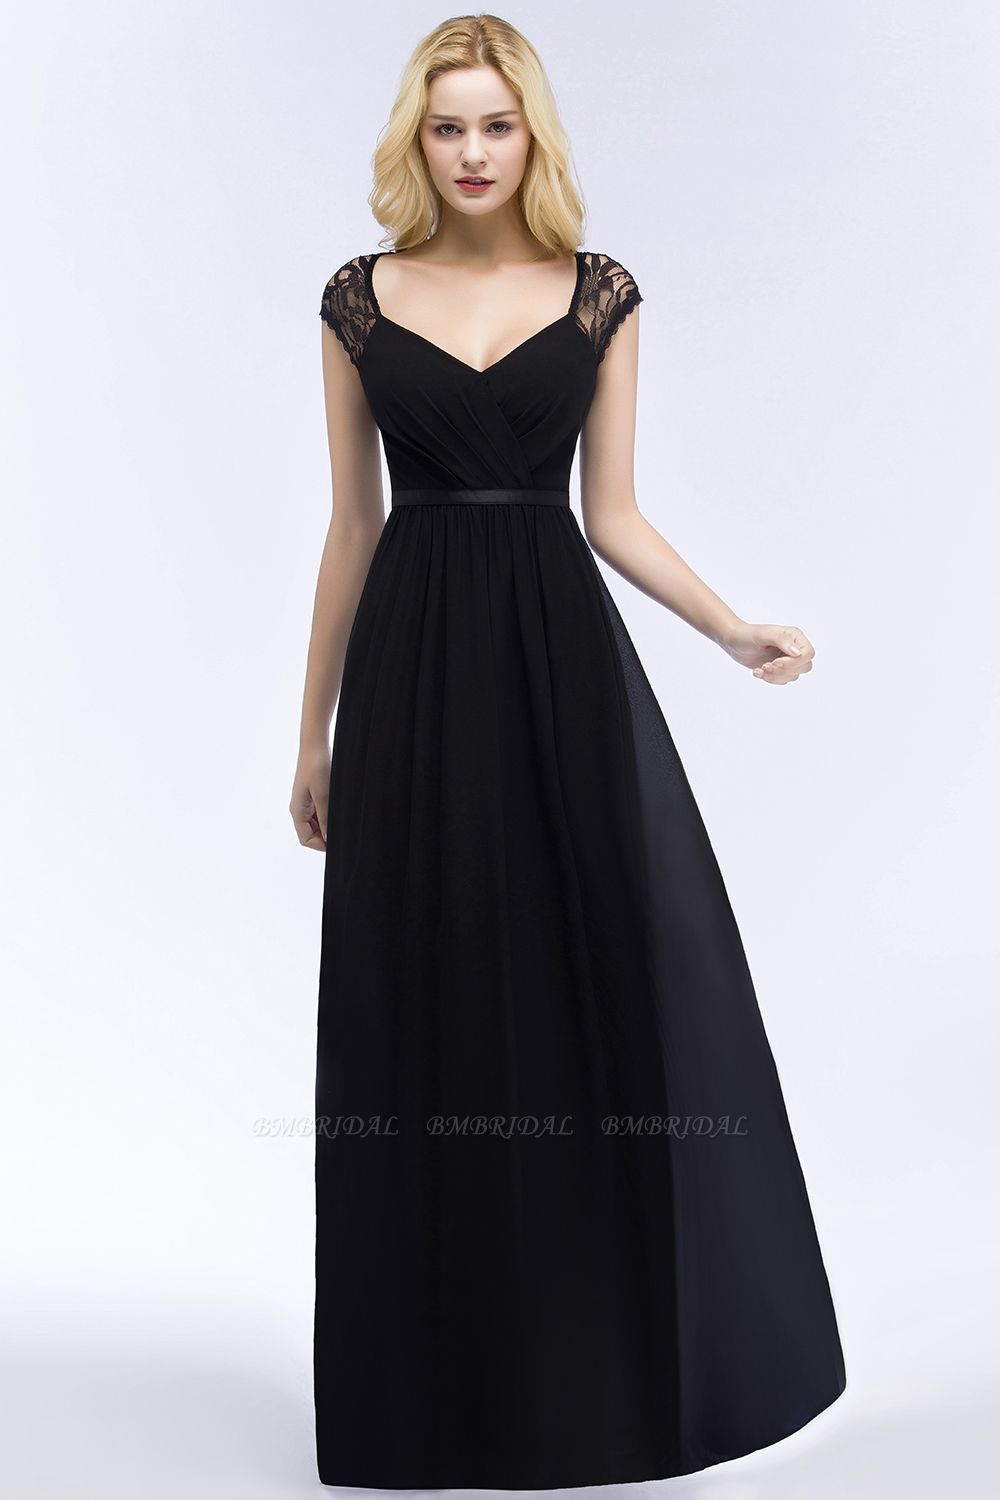 BMbridal Elegant A-line Chiffon Lace V-neck Long Affordable Bridesmaid Dresses In Stock